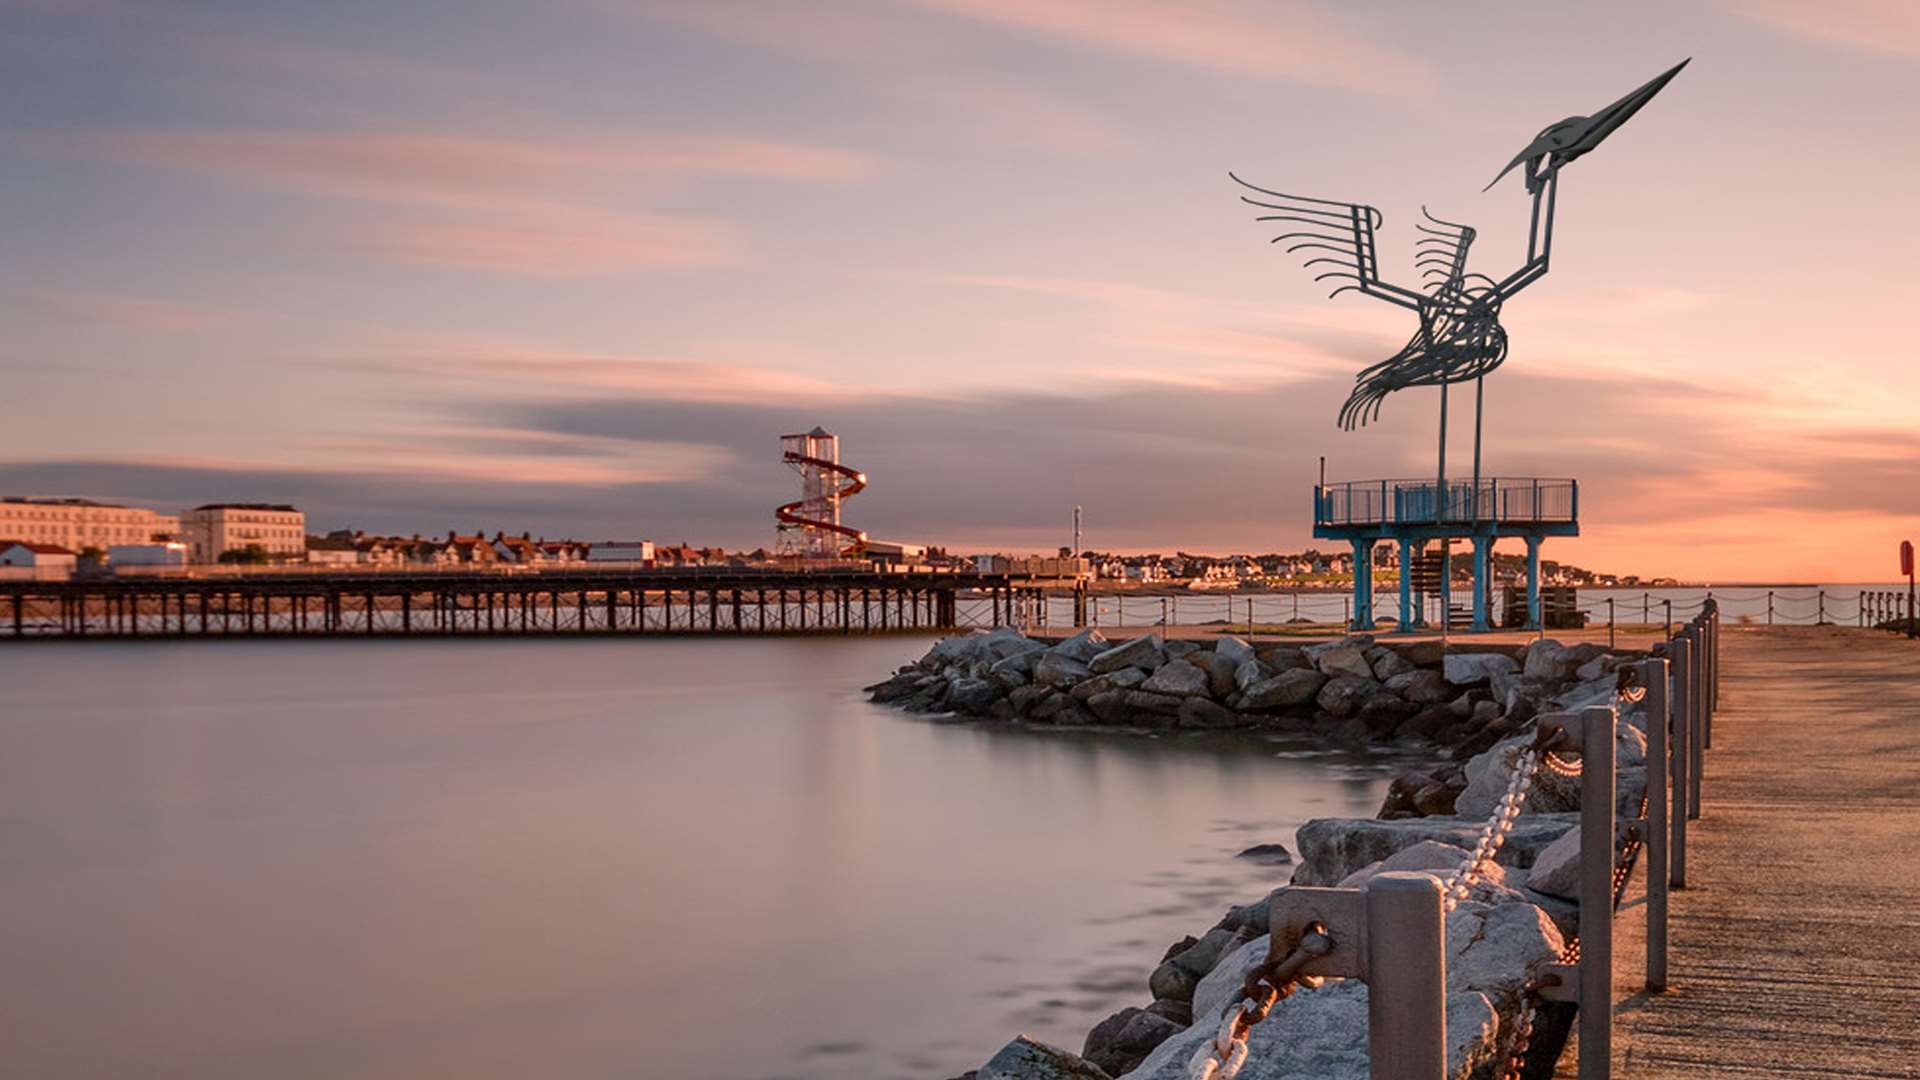 Plans for a new heron sculpture on Neptune's Arm have been revealed